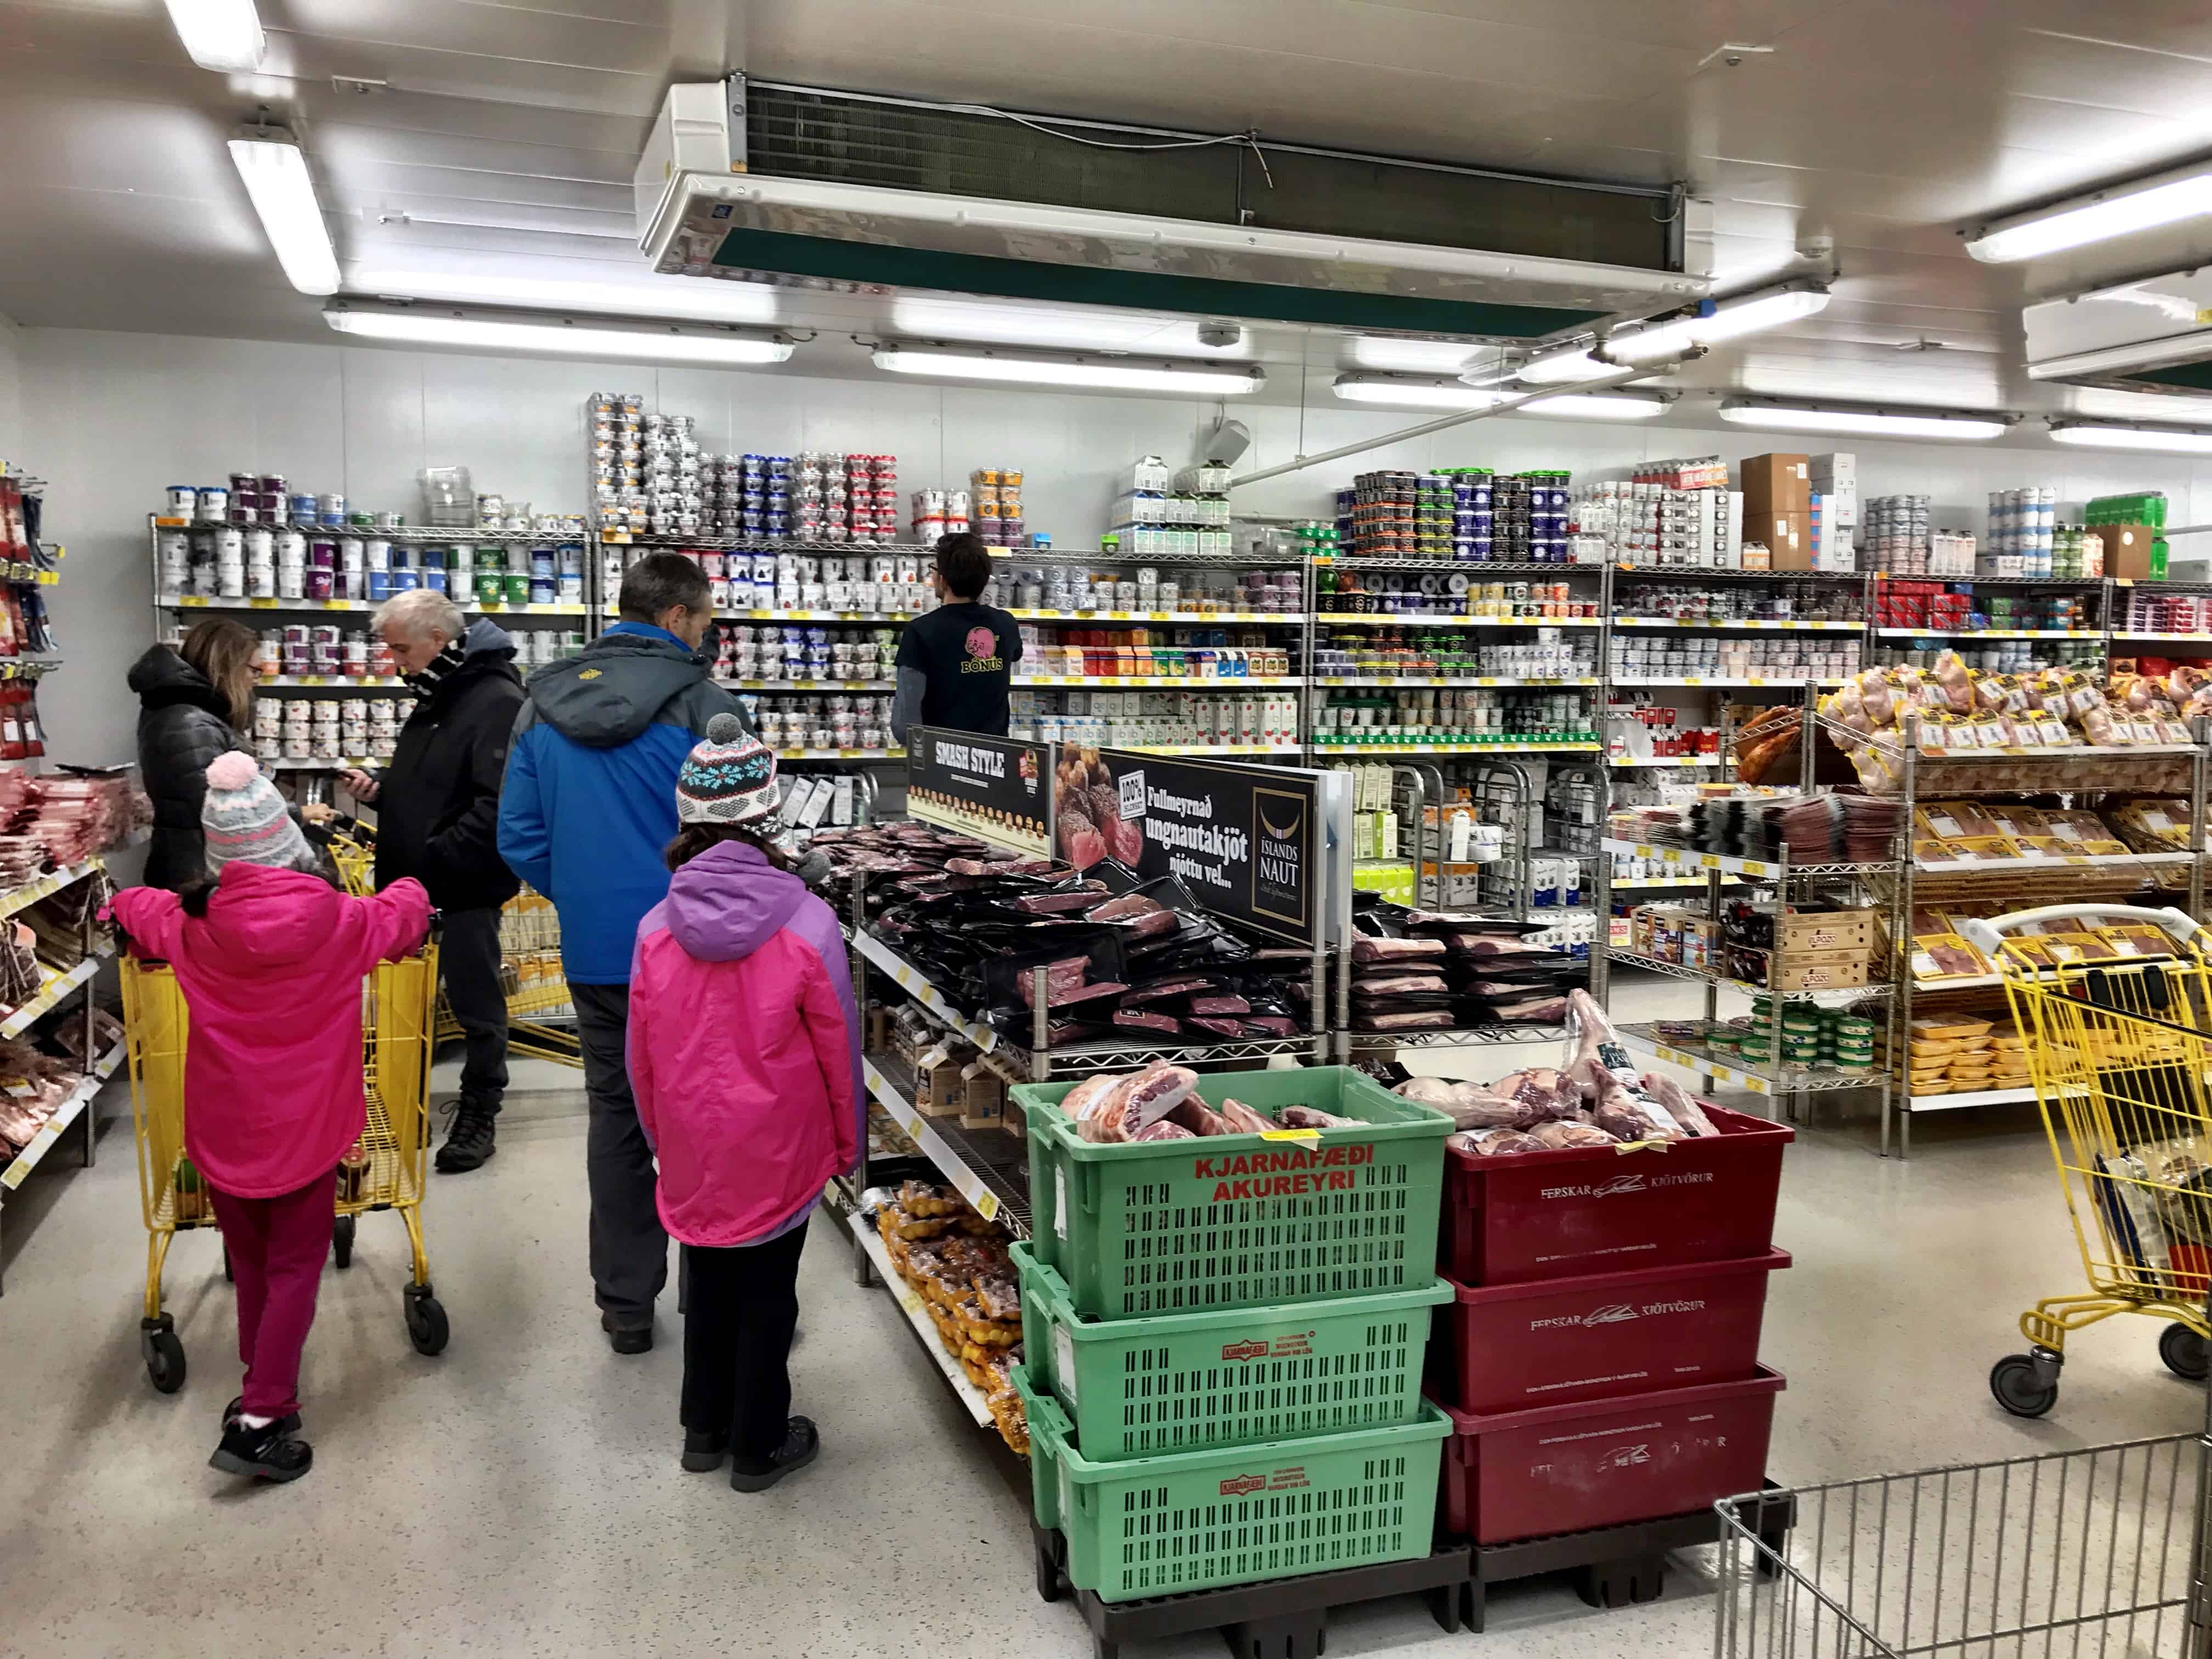 Visiting Iceland with Kids - Inside Bonus Grocery Store